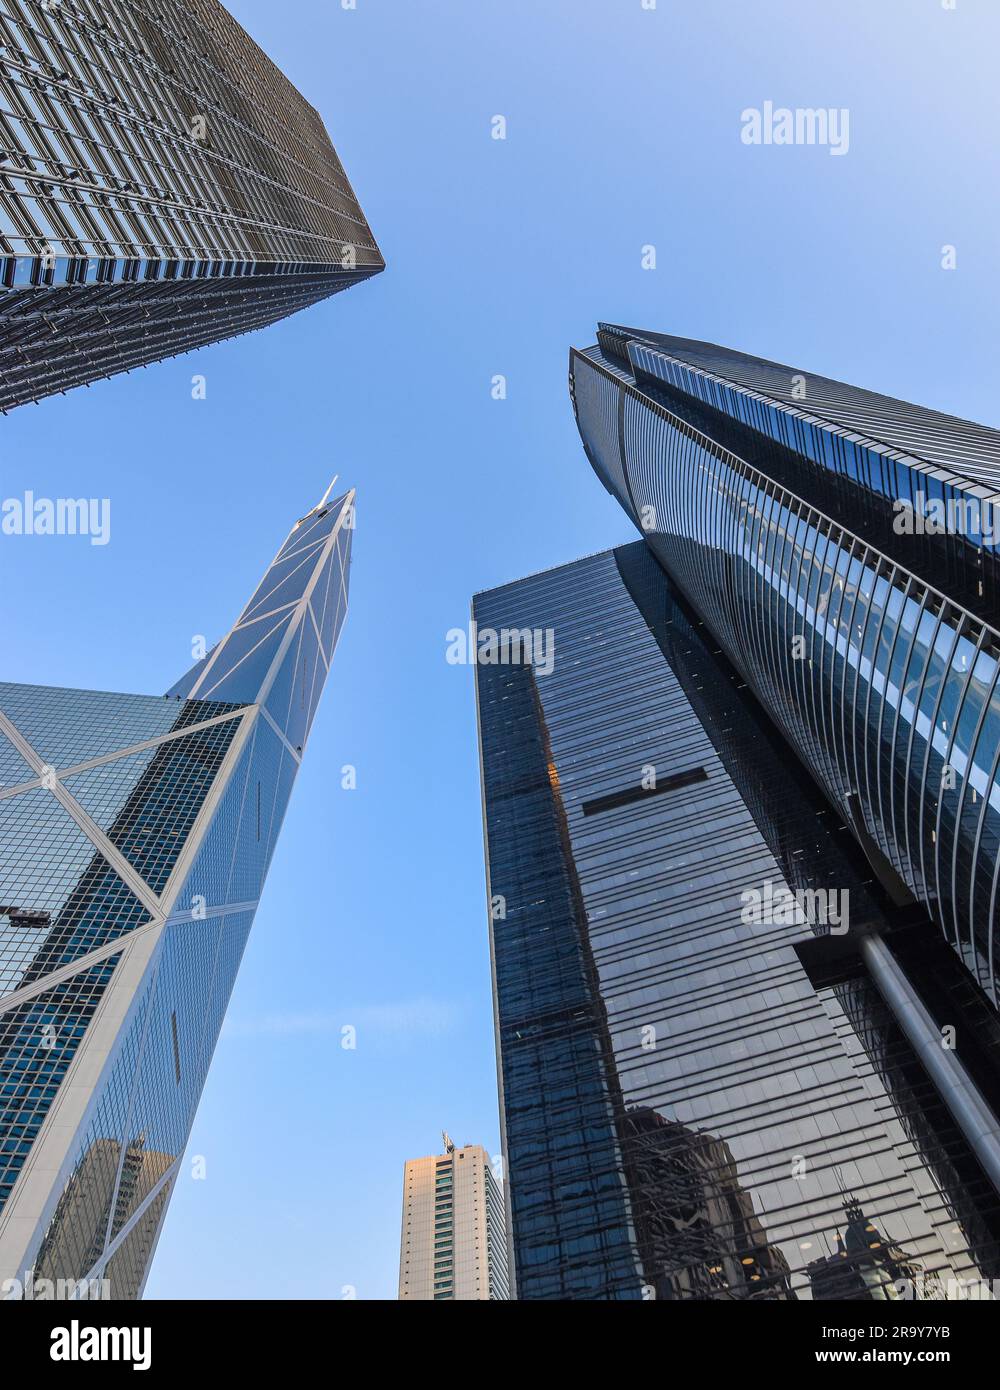 Bottom view of modern skyscrapers in business district. Stock Photo